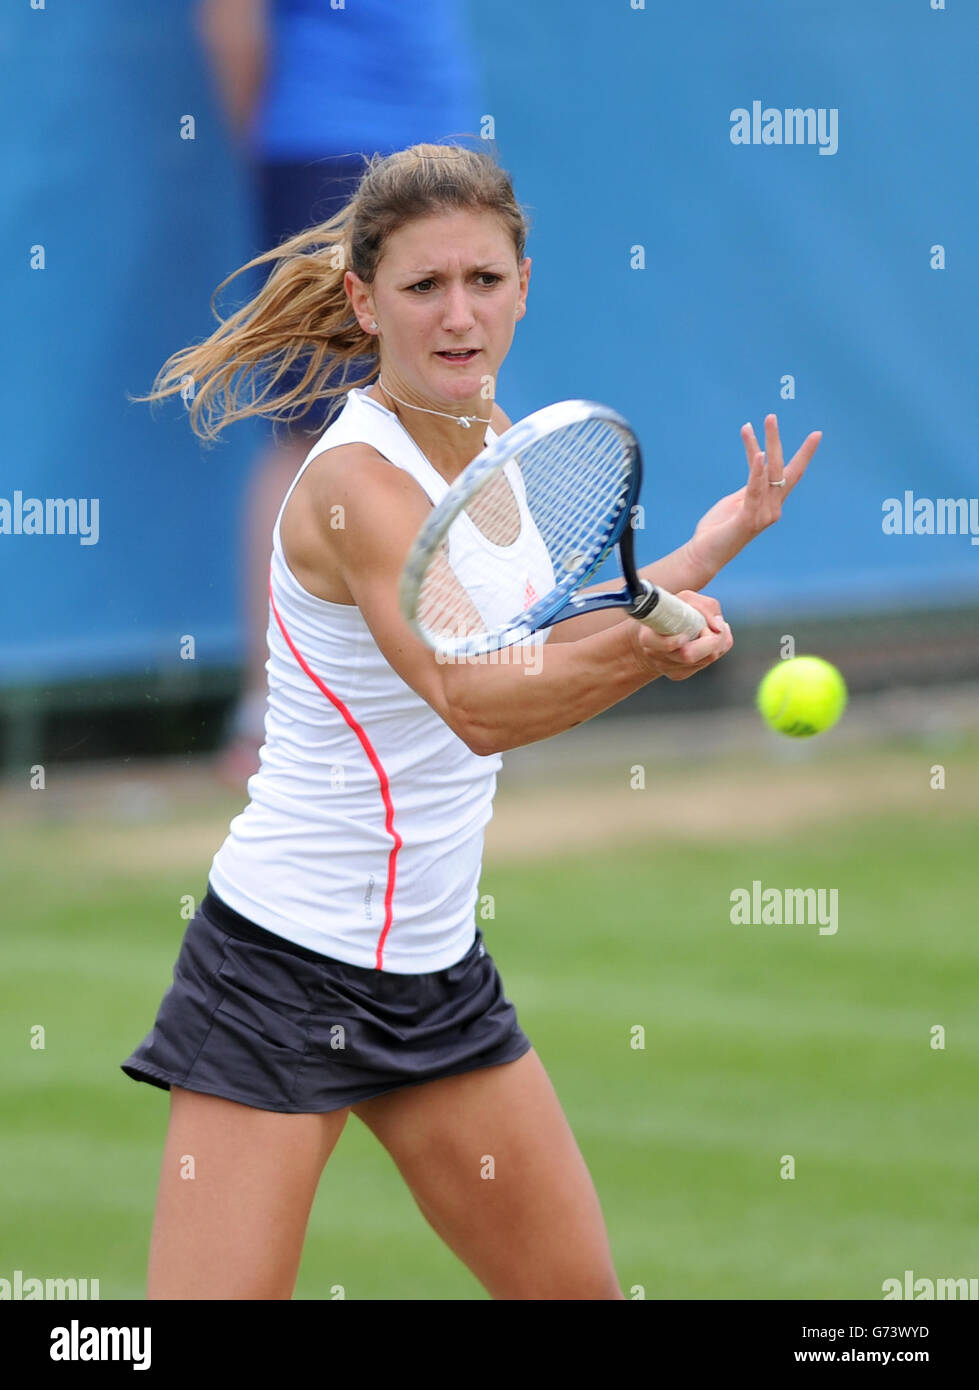 Great Britain's Jade Windley in action against Poland's Magda Linette during the AEGON Nottingham Challenge at The Nottingham Tennis Centre, Nottingham. Stock Photo